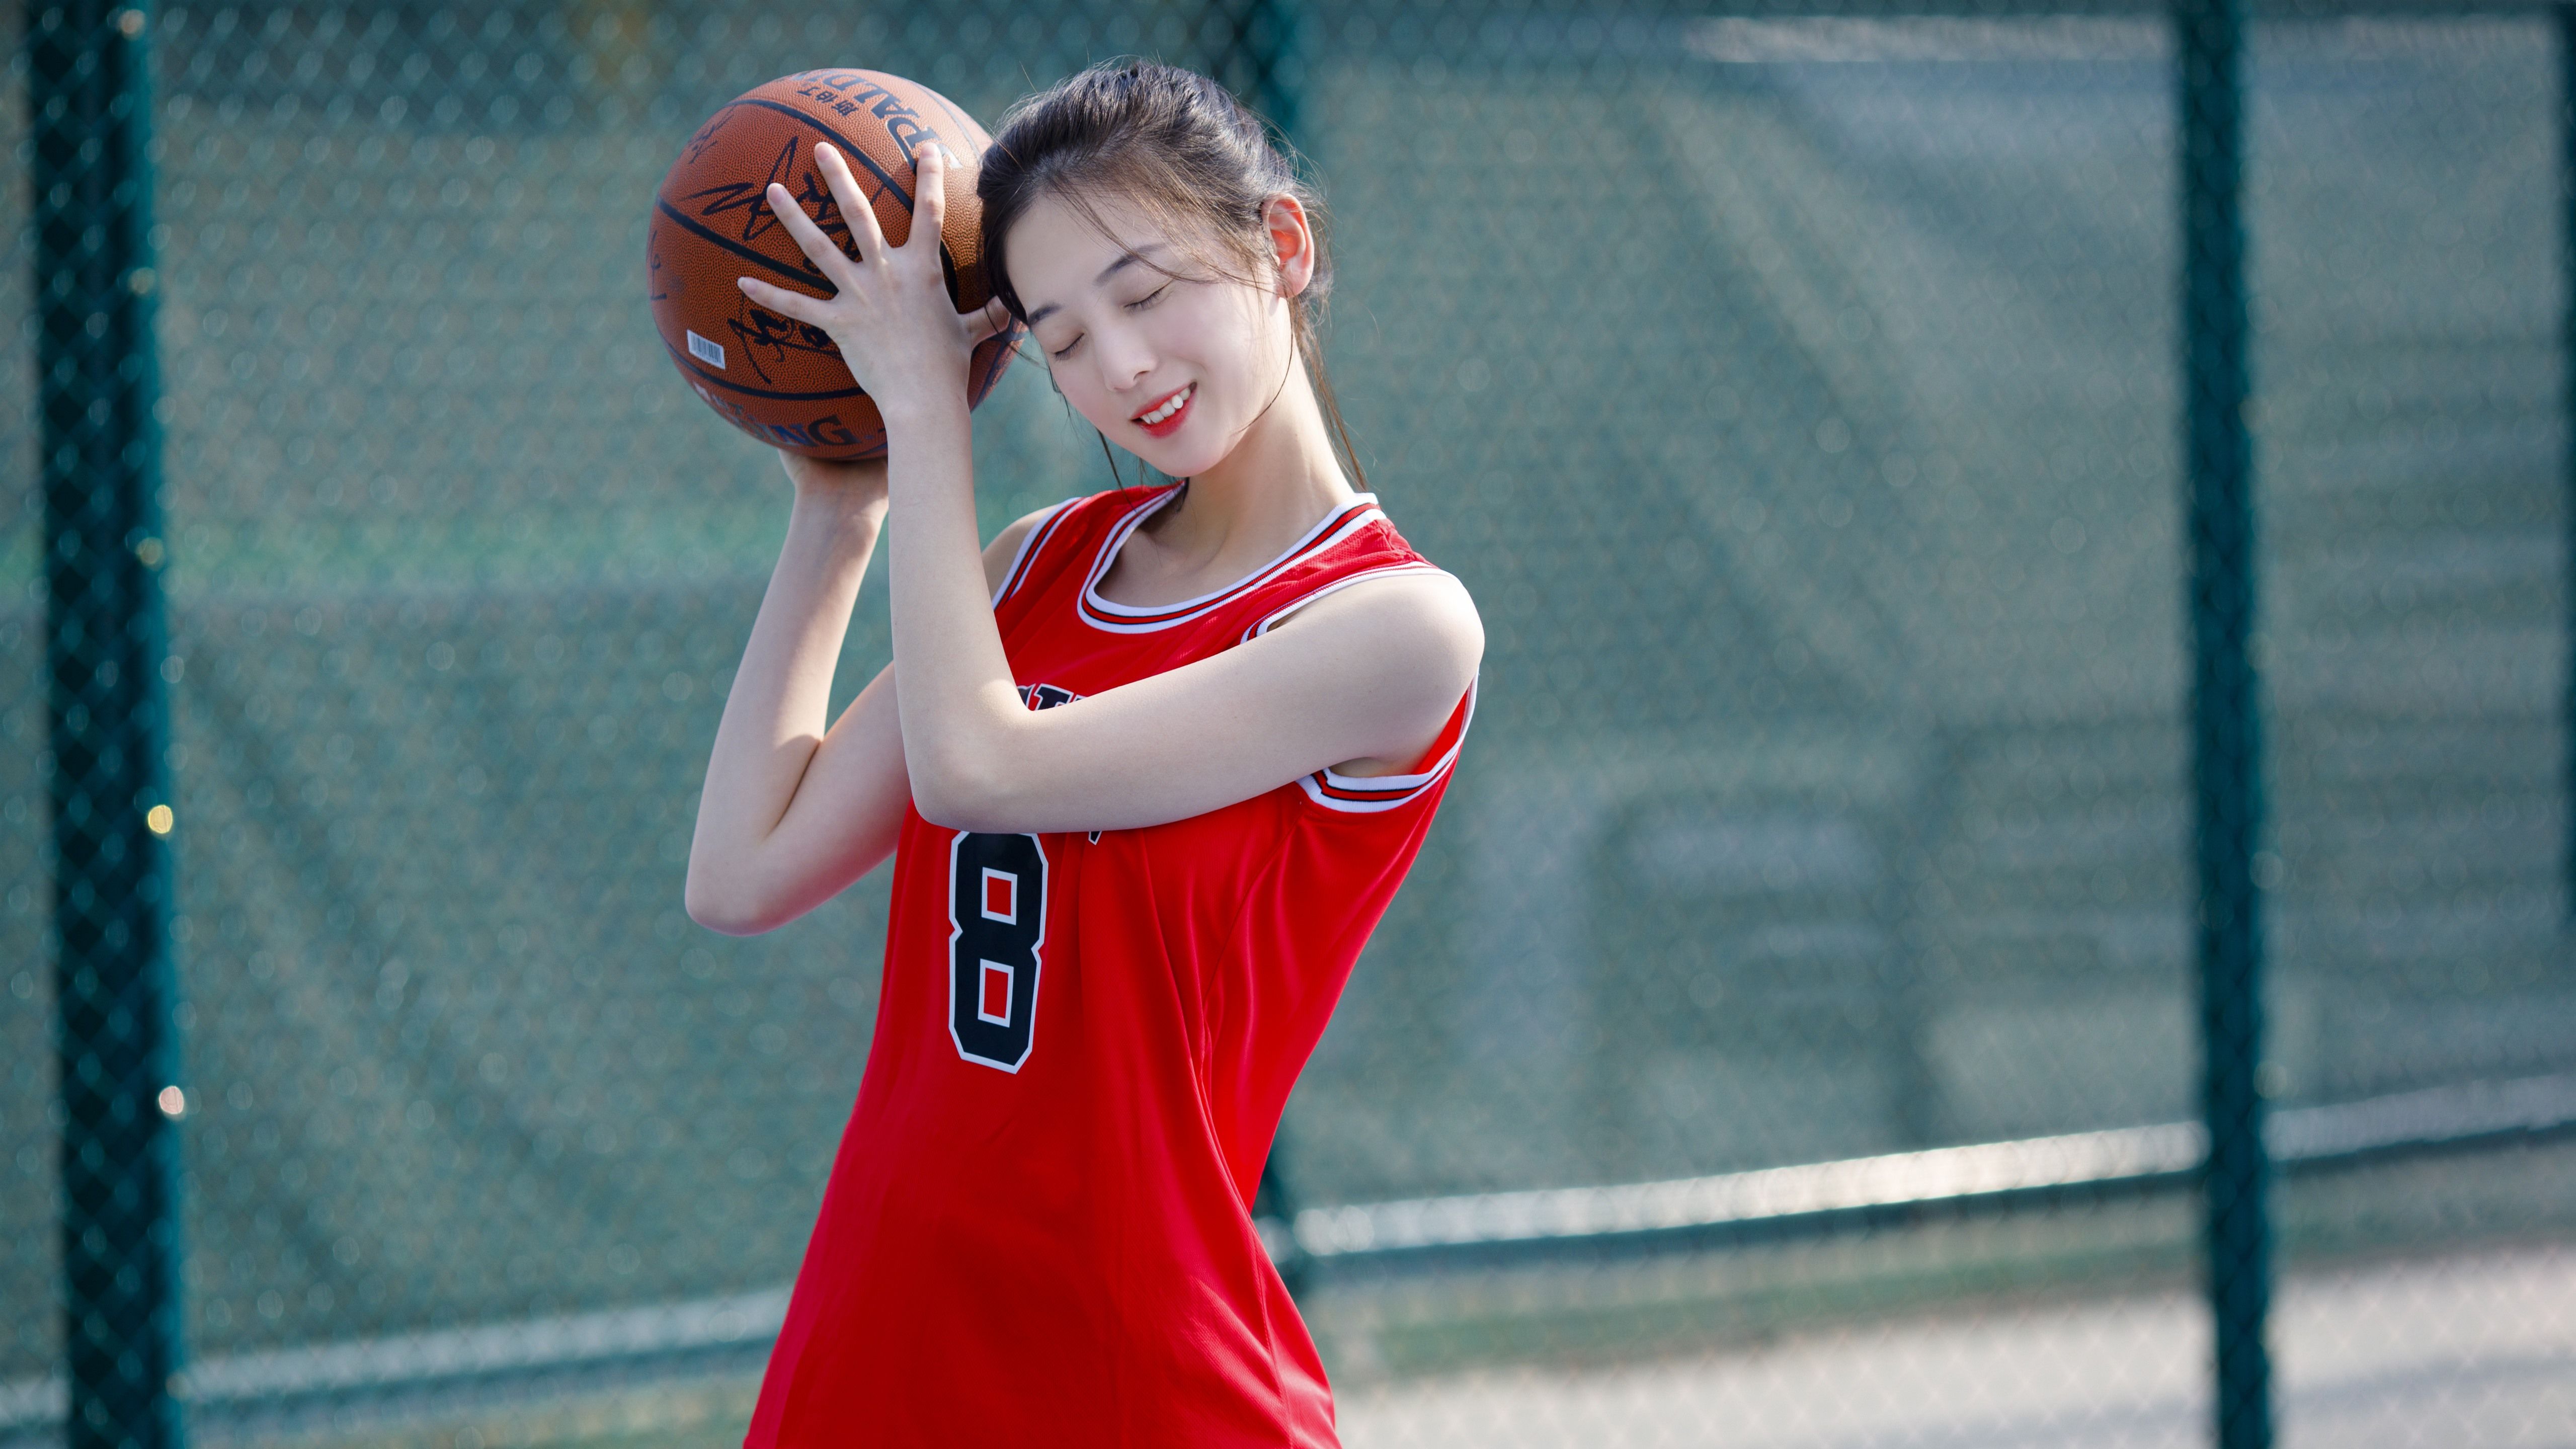 Wallpaper ID 693614  basketball on the floor sports jerseys women  outdoors women sneakers basketball court looking at viewer 2K  outdoors depth of field ball spread legs free download